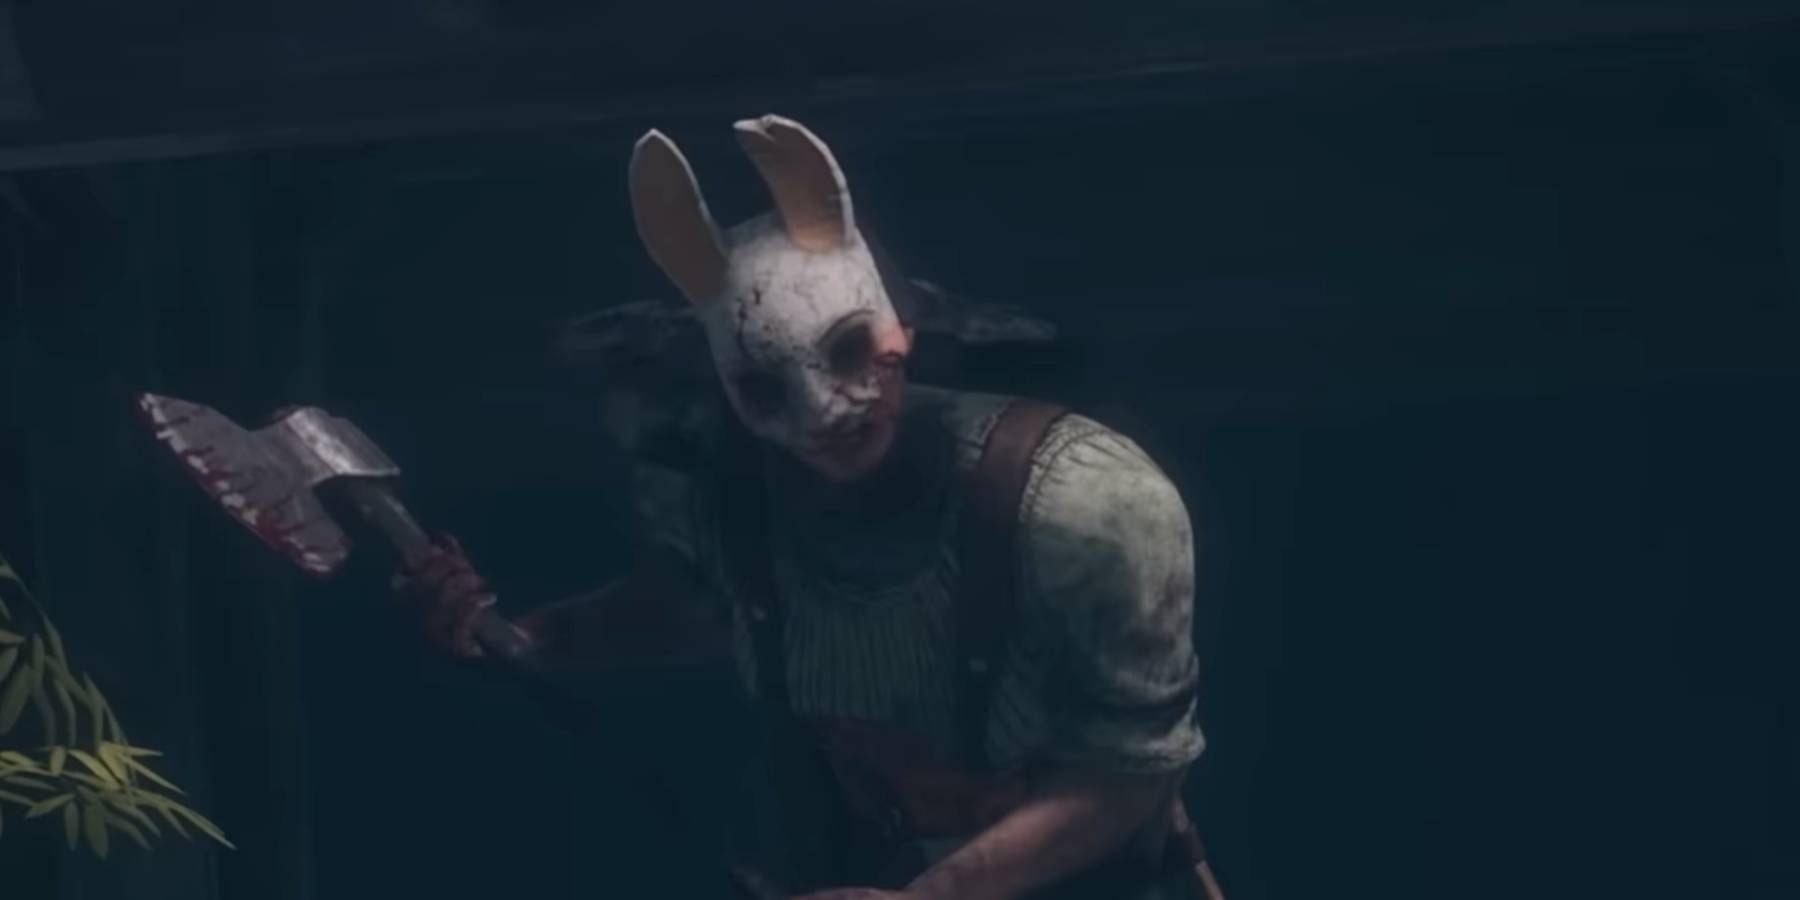 The Huntress in Dead by Daylight's Lights Out trailer